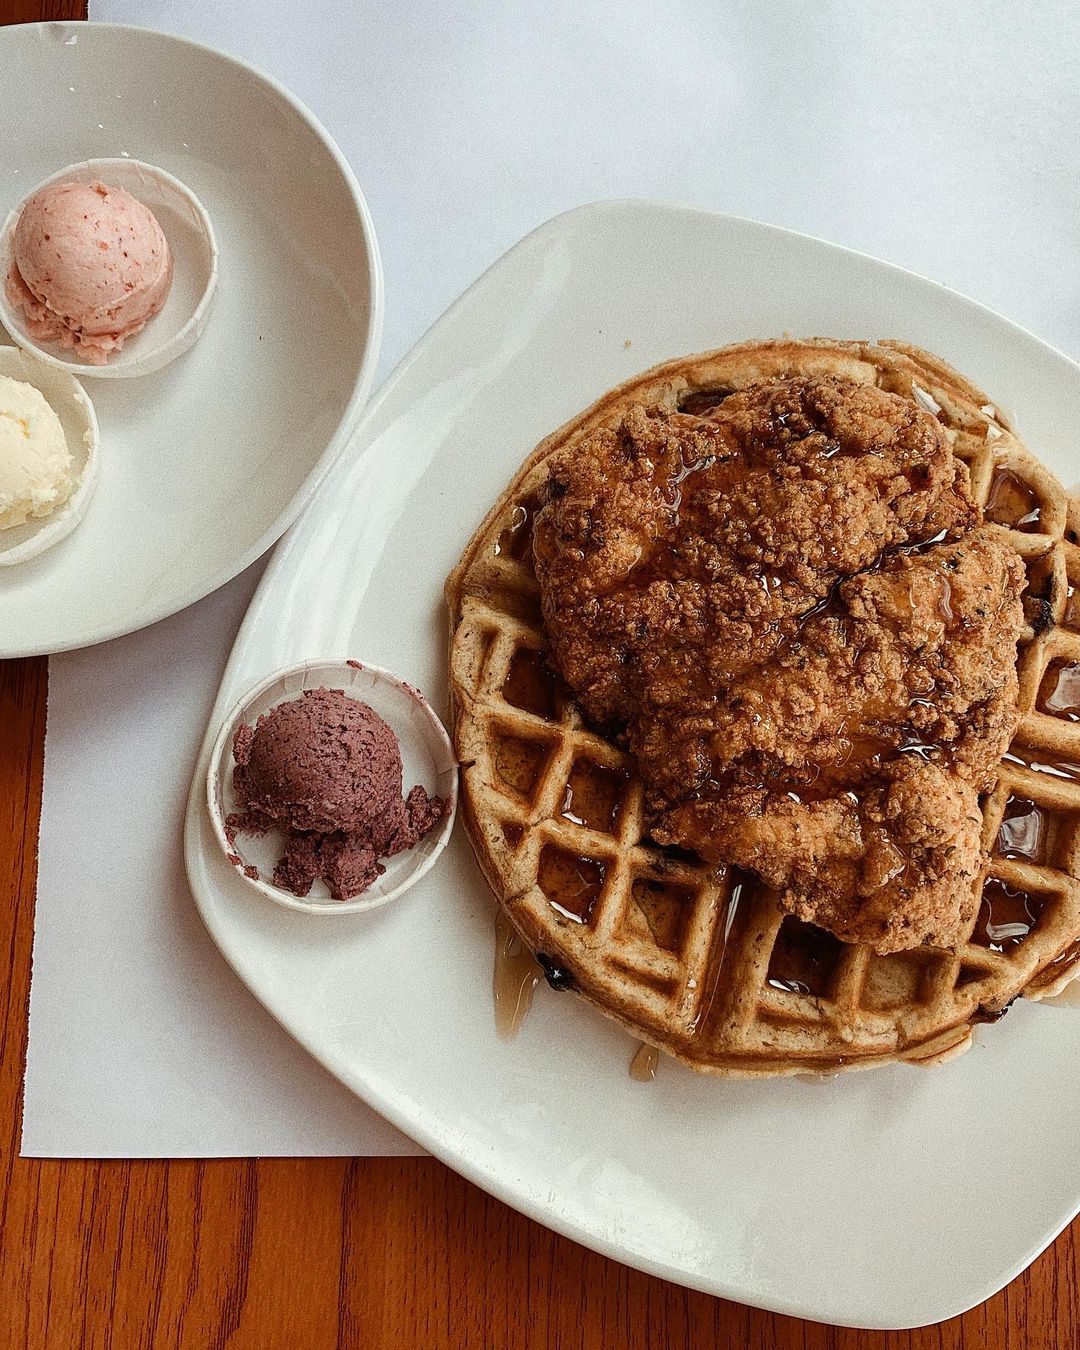 Chicken and Waffles from Dames Chicken & Waffles. Photo by Instagram user @theeatsheetnc